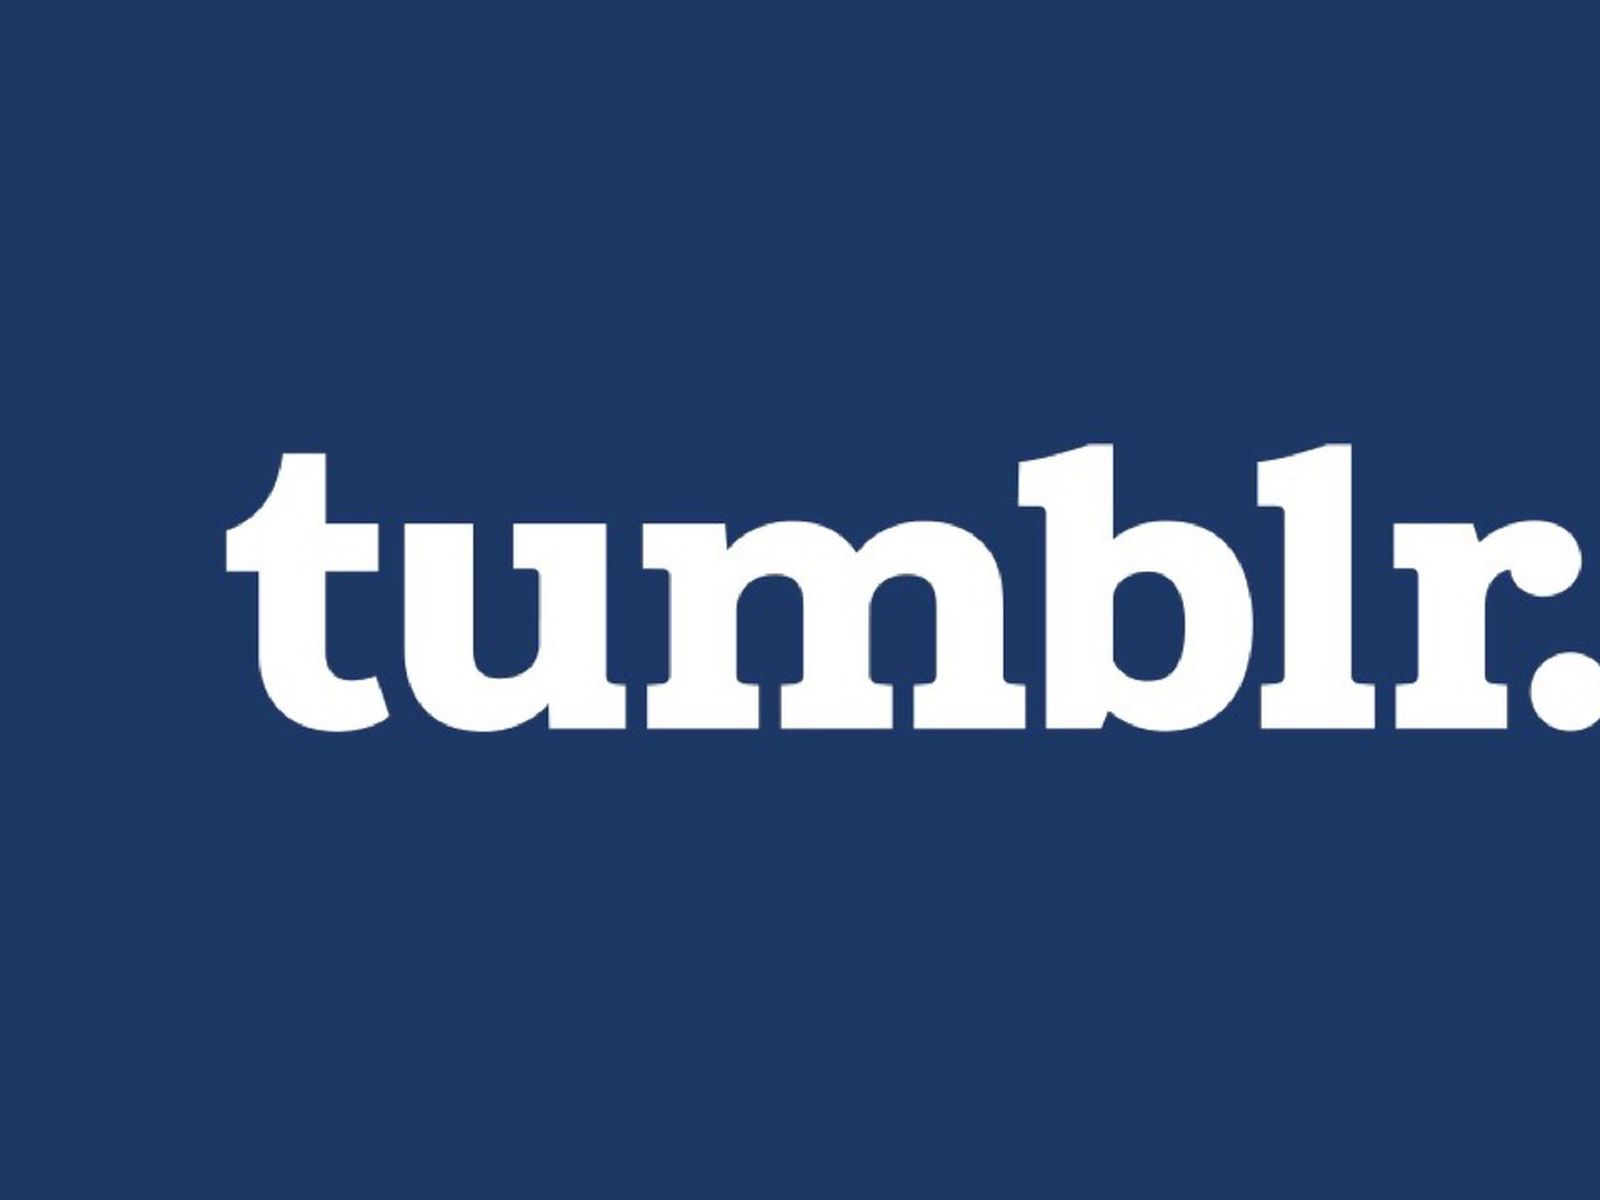 Adolesent Porn Unfiltered - Tumblr Removed From App Store Over Failure to Filter Out Child Pornography  - MacRumors